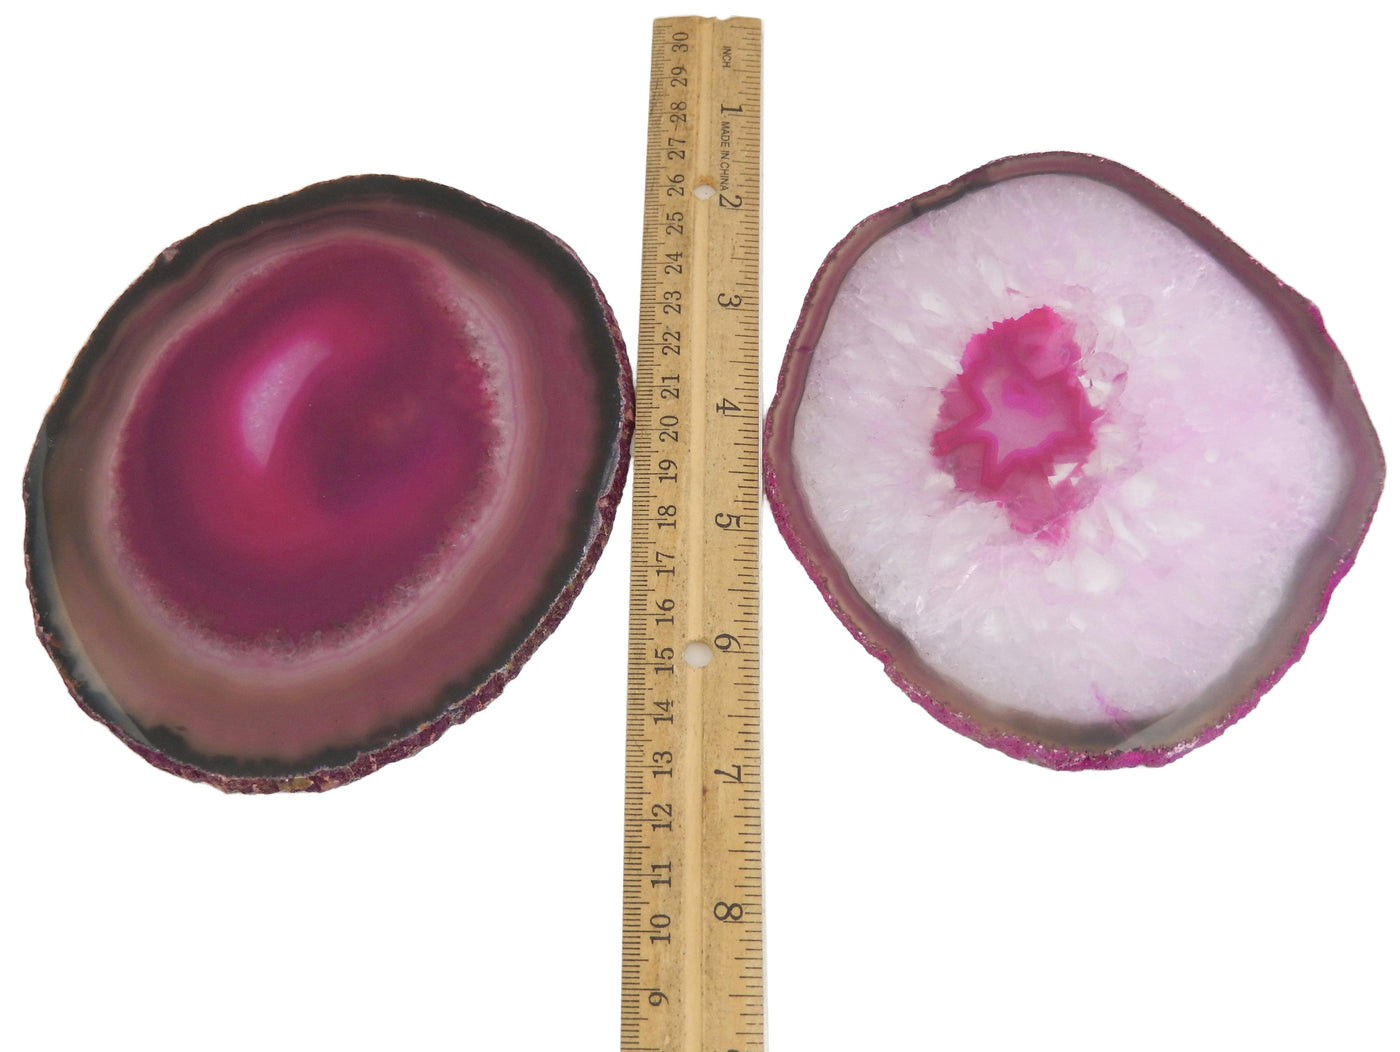 Two Pink Agate Slices #6 next to a ruler for size reference